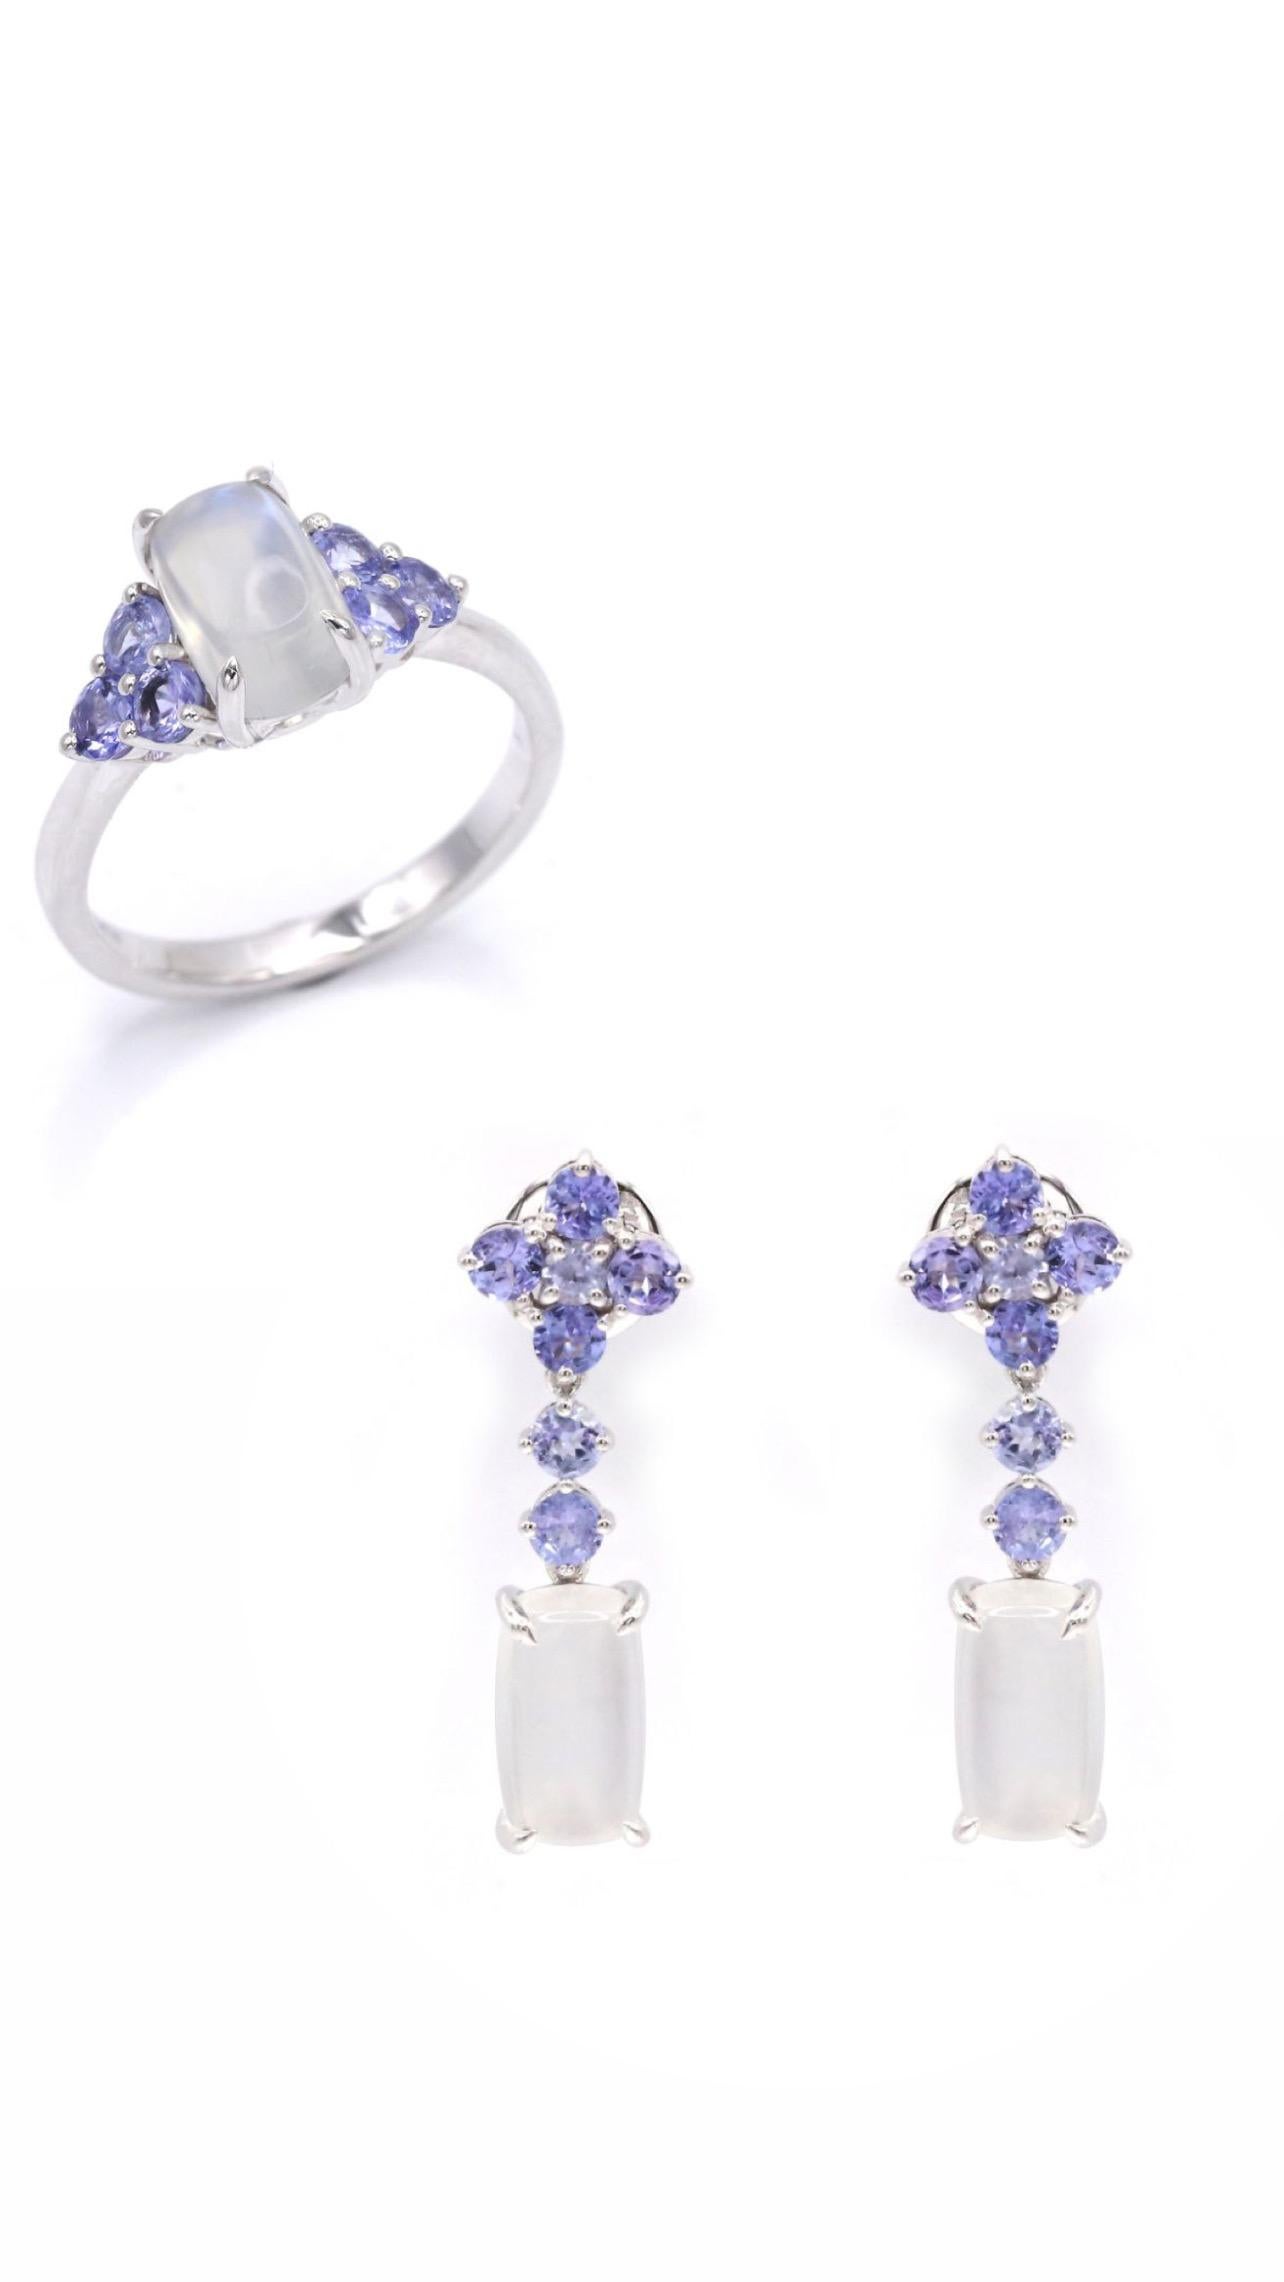 Baguette Cut 9.94 Carat Moonstone Tanzanite 18K White Gold Cocktail Ring and Drop Earrings For Sale